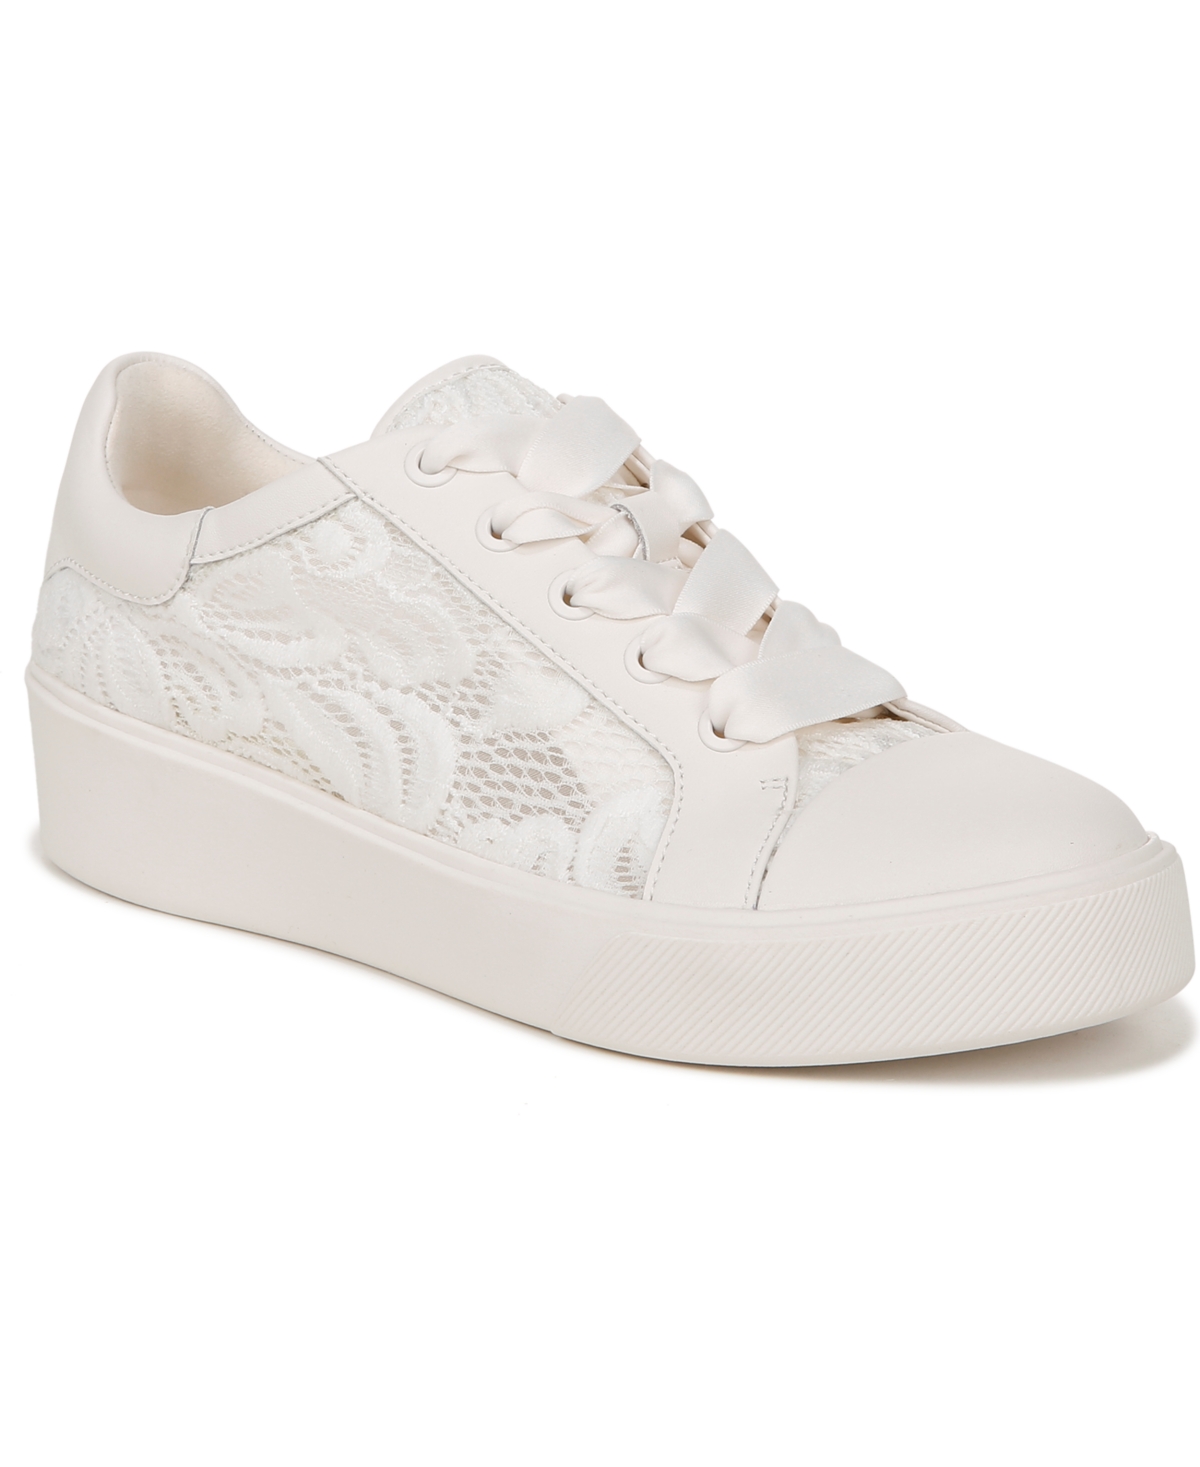 Morrison 2.1 Sneakers - White Lace/Leather